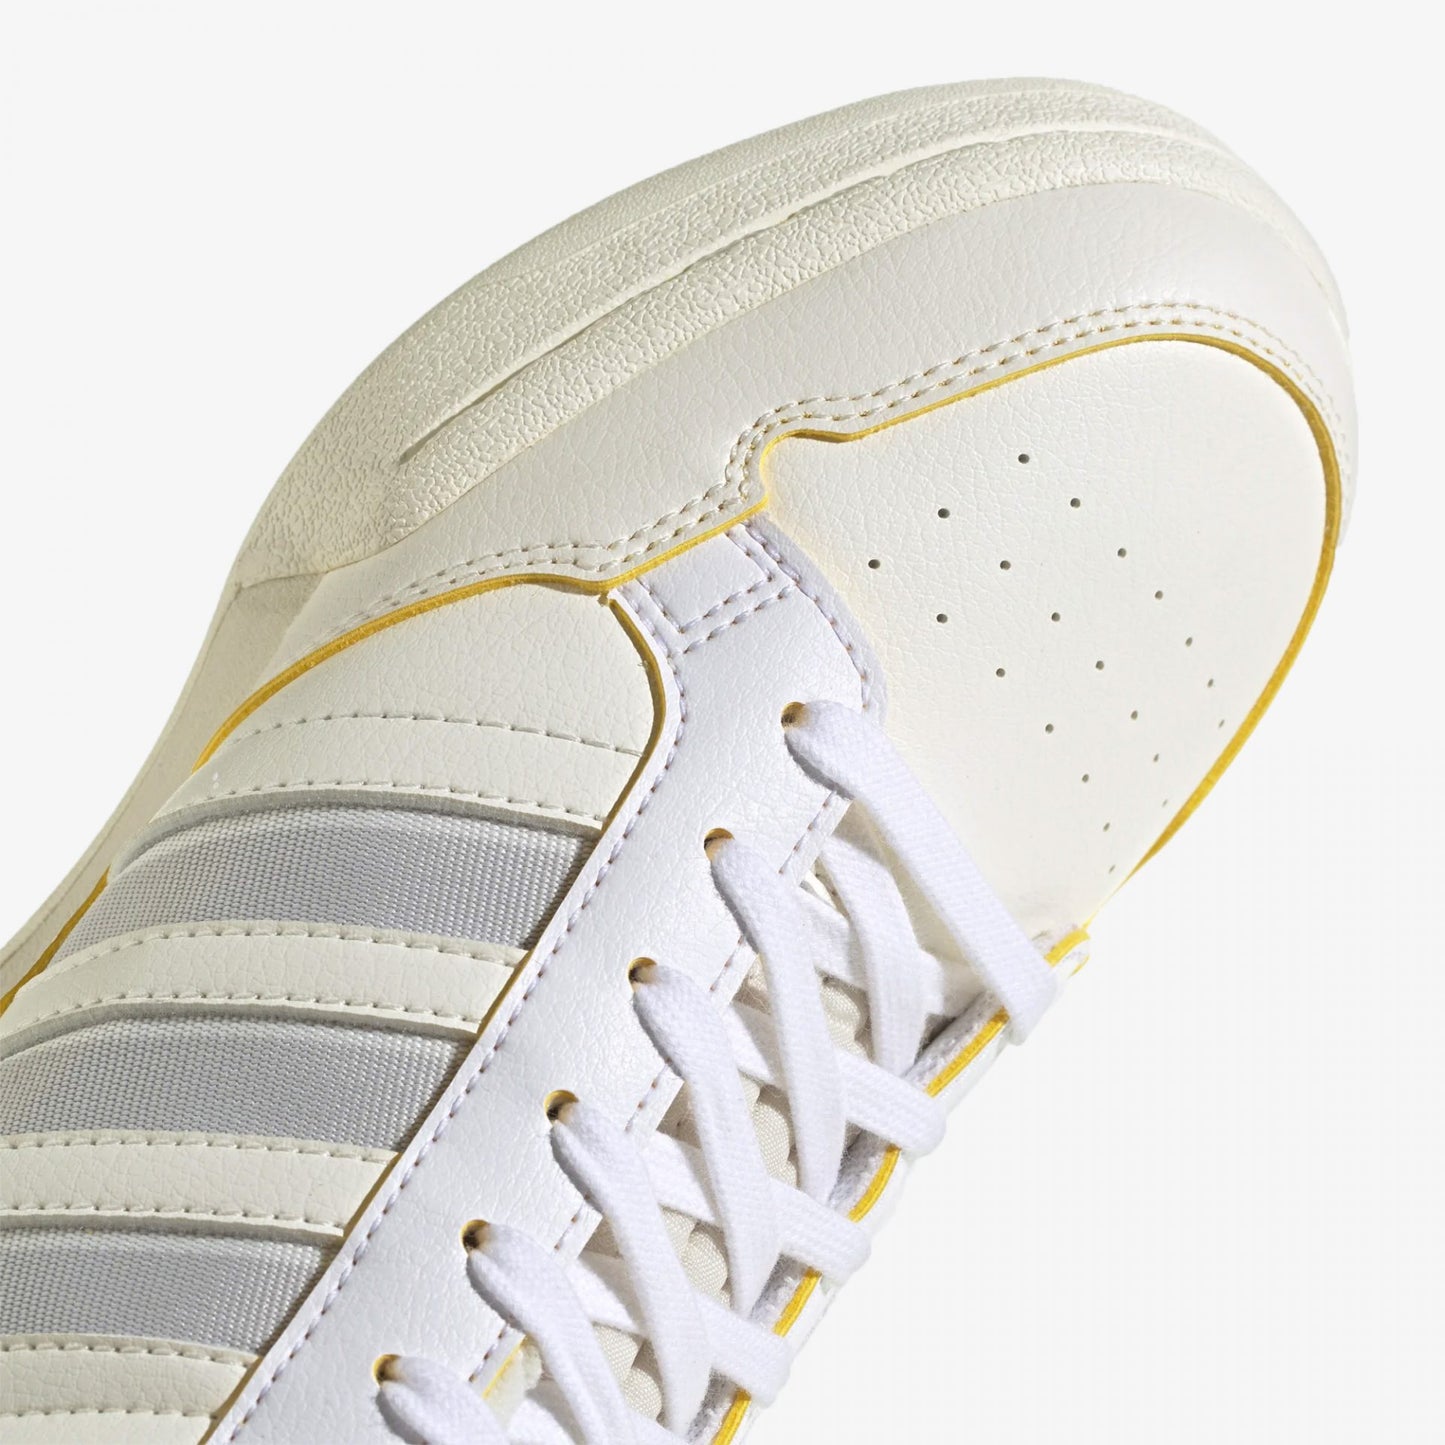 CONTINENTAL 80 STRIPES 'CLOUD WHITE/GREY ONE'